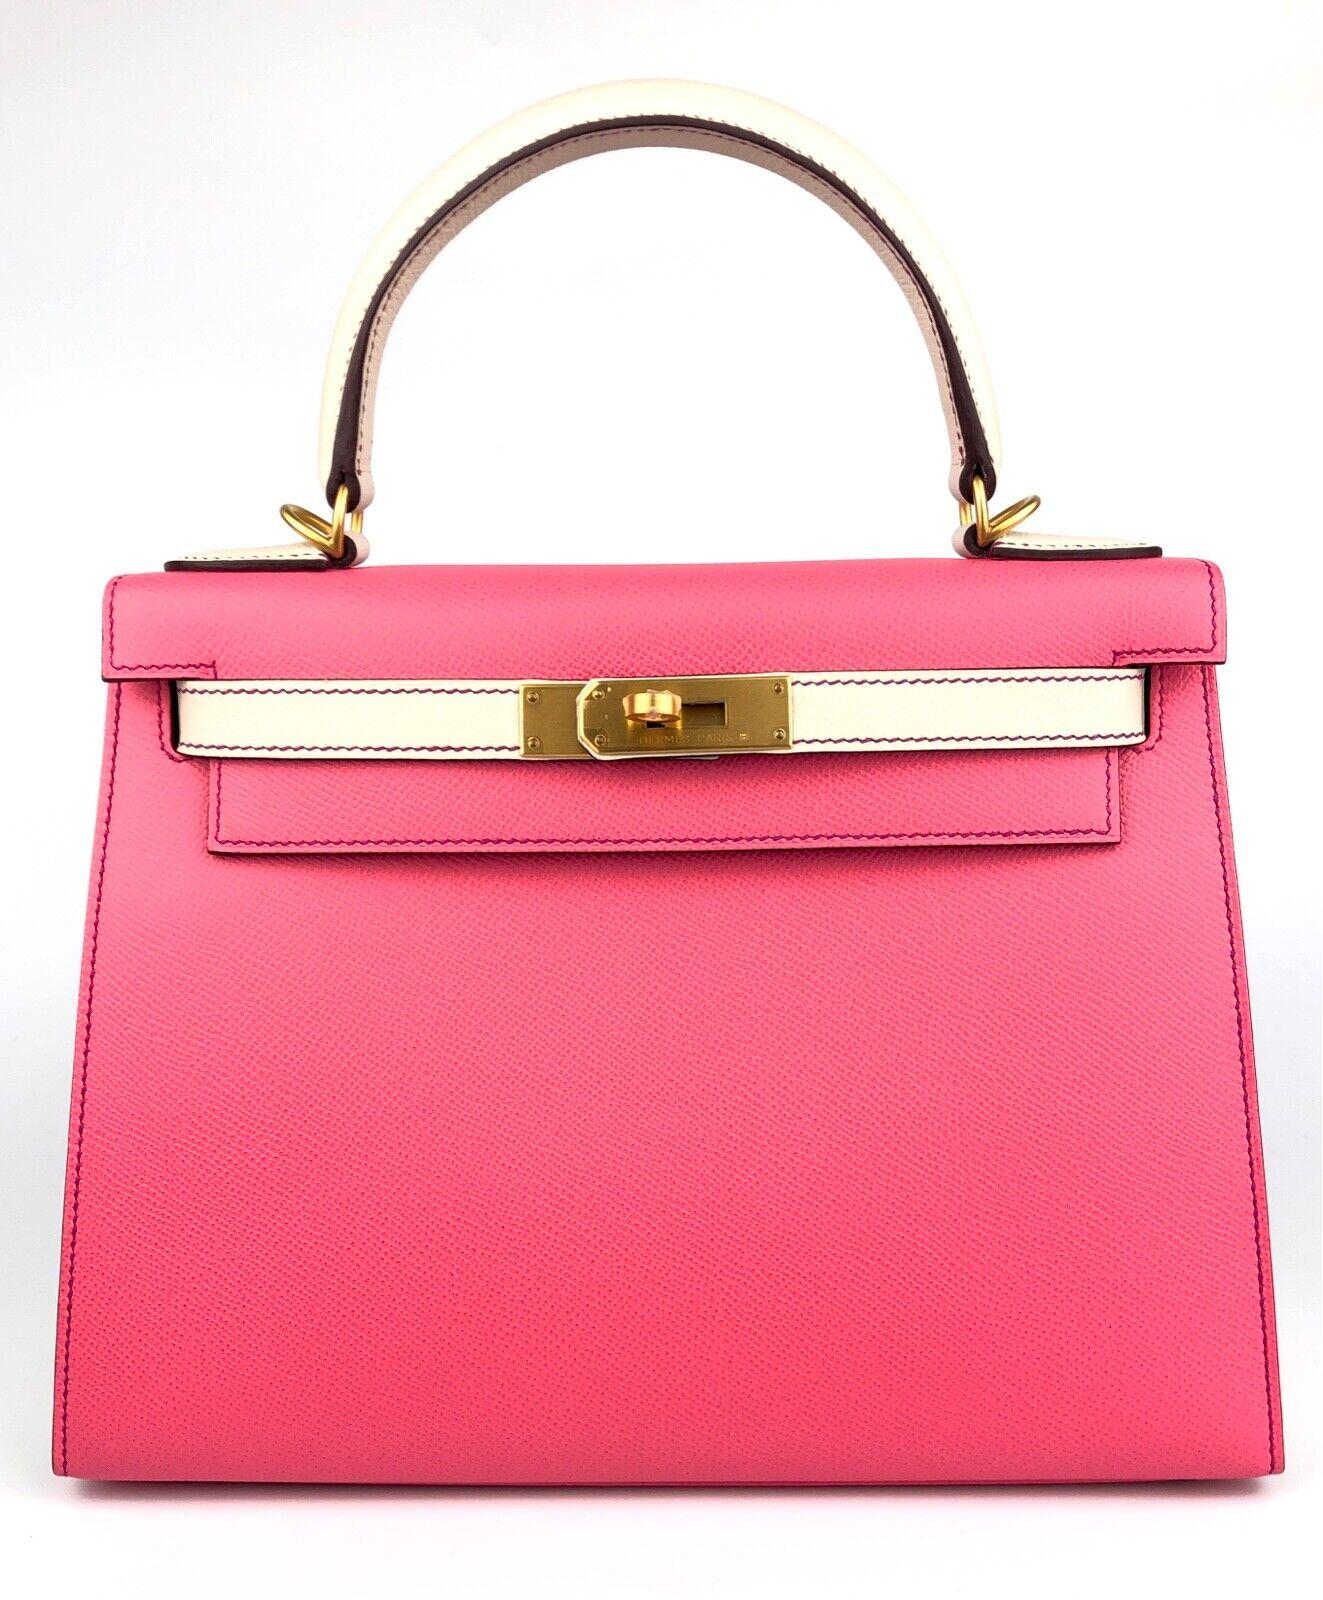 Absolutely Stunning 1 of 1 As New Hermes Kelly 28 Sellier HSS Special Order Rose Azalee & Craie Epsom Leather complimented contrast Pink Stitching and Brushed Gold Hardware. Plastic on all hardware and feet. 2018 C Stamp.

Shop with Confidence from